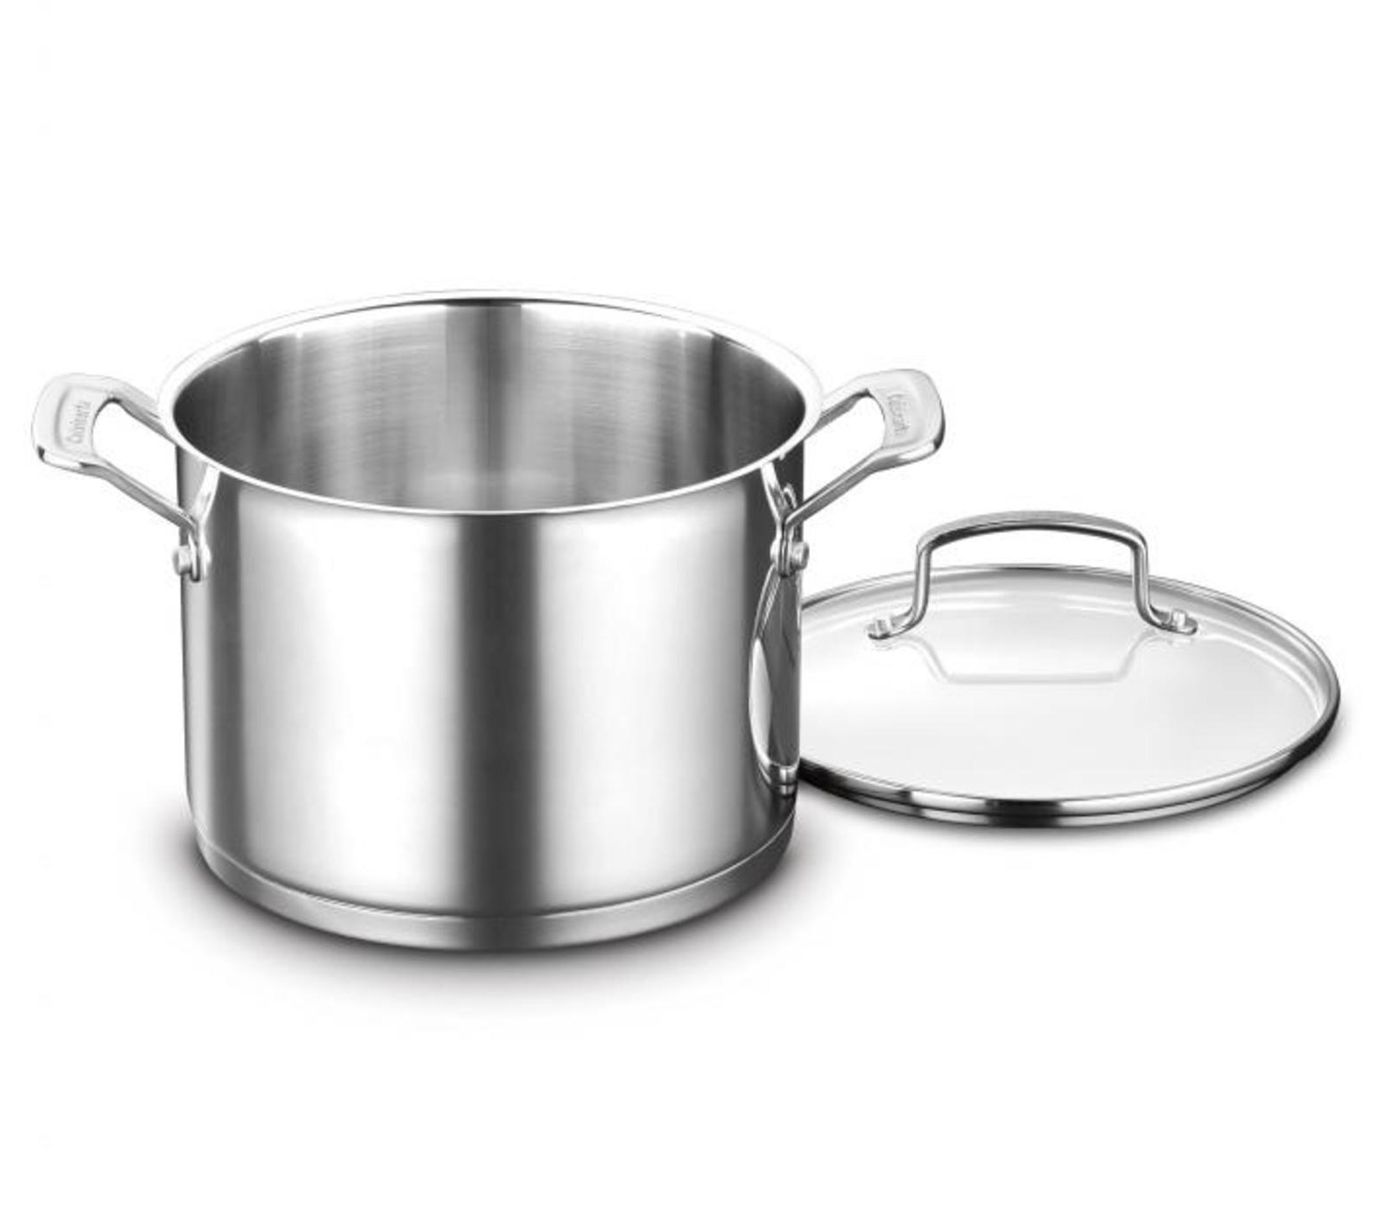 Cuisinart 6 Quart Stockpot with Cover 